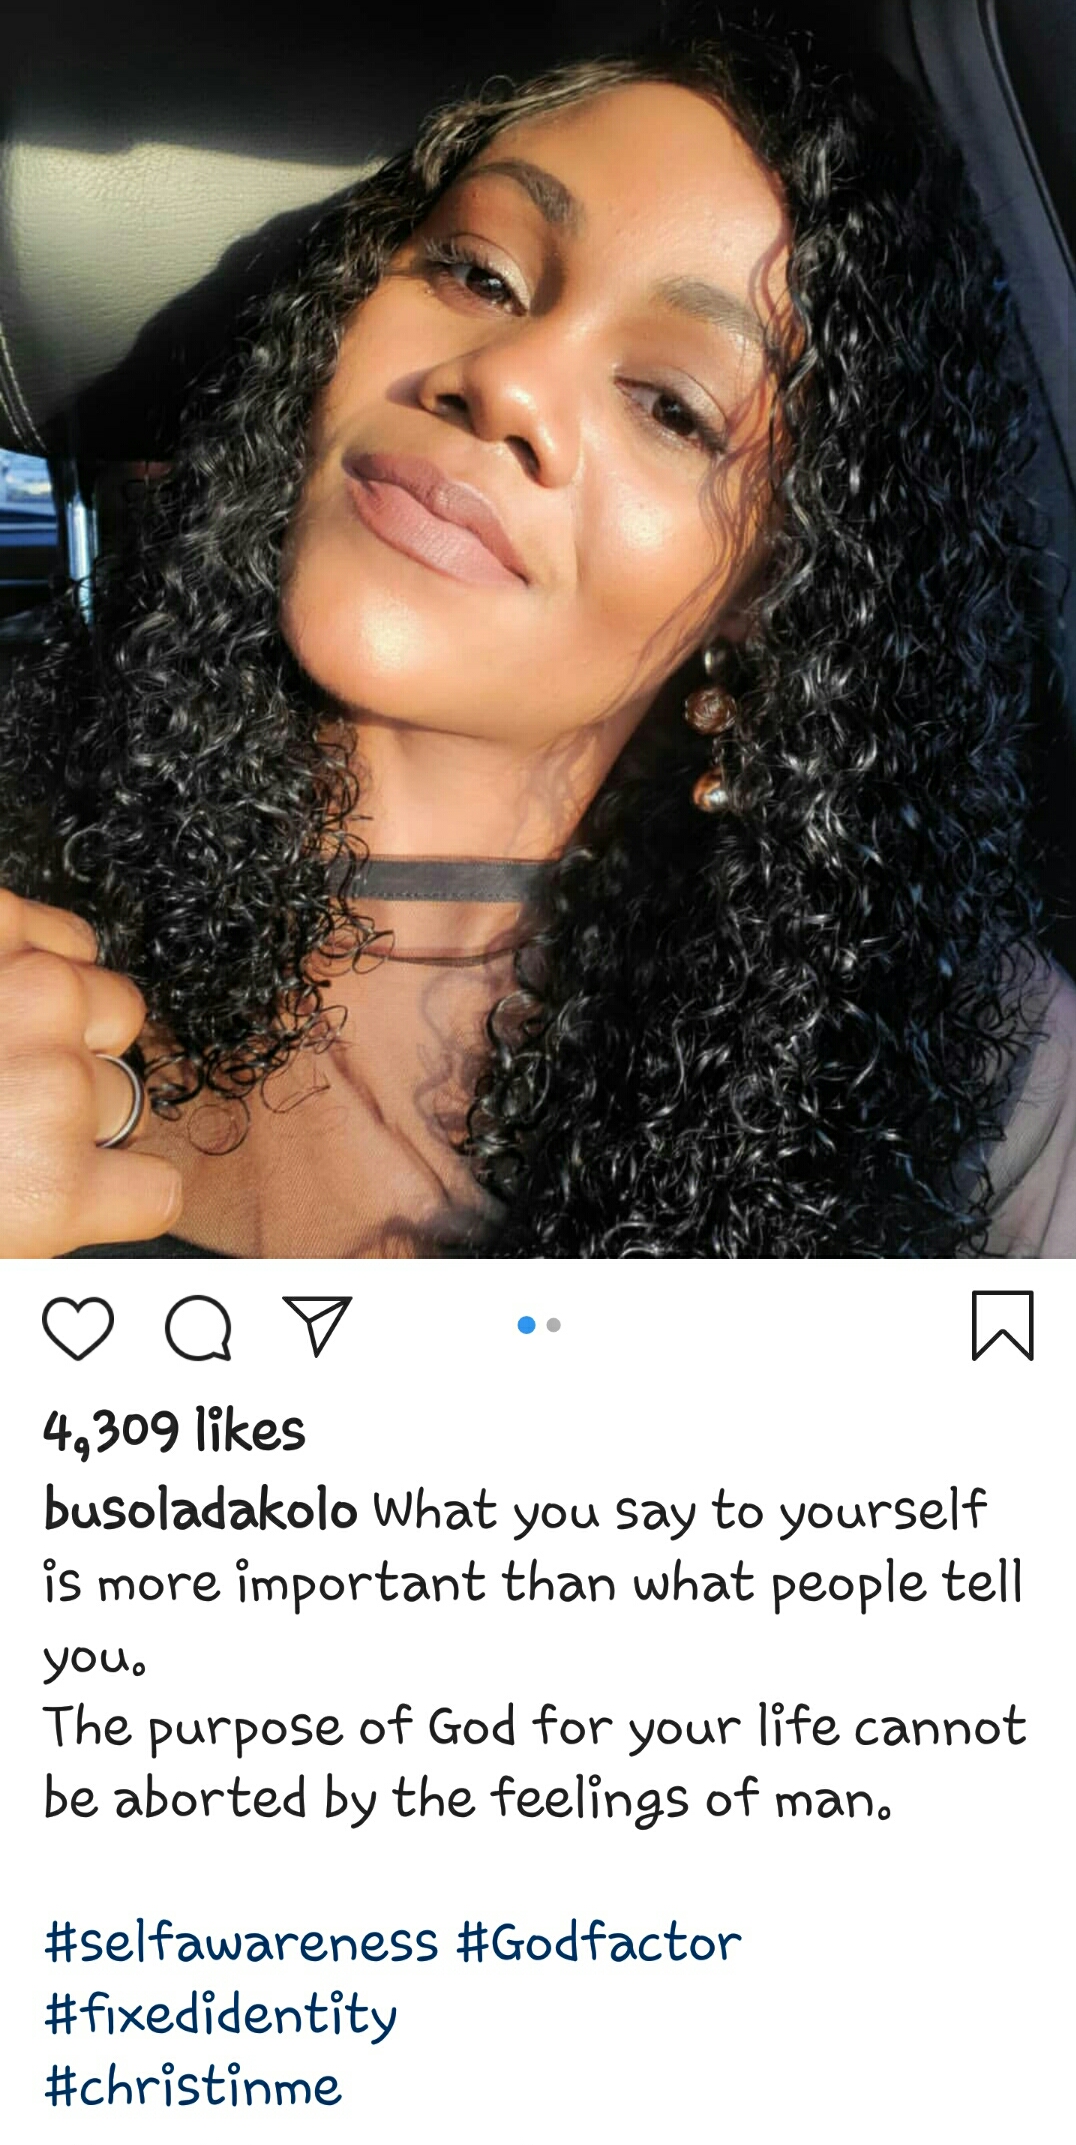 What you say to yourself is more important than what people tell you"-Busola Dakolo